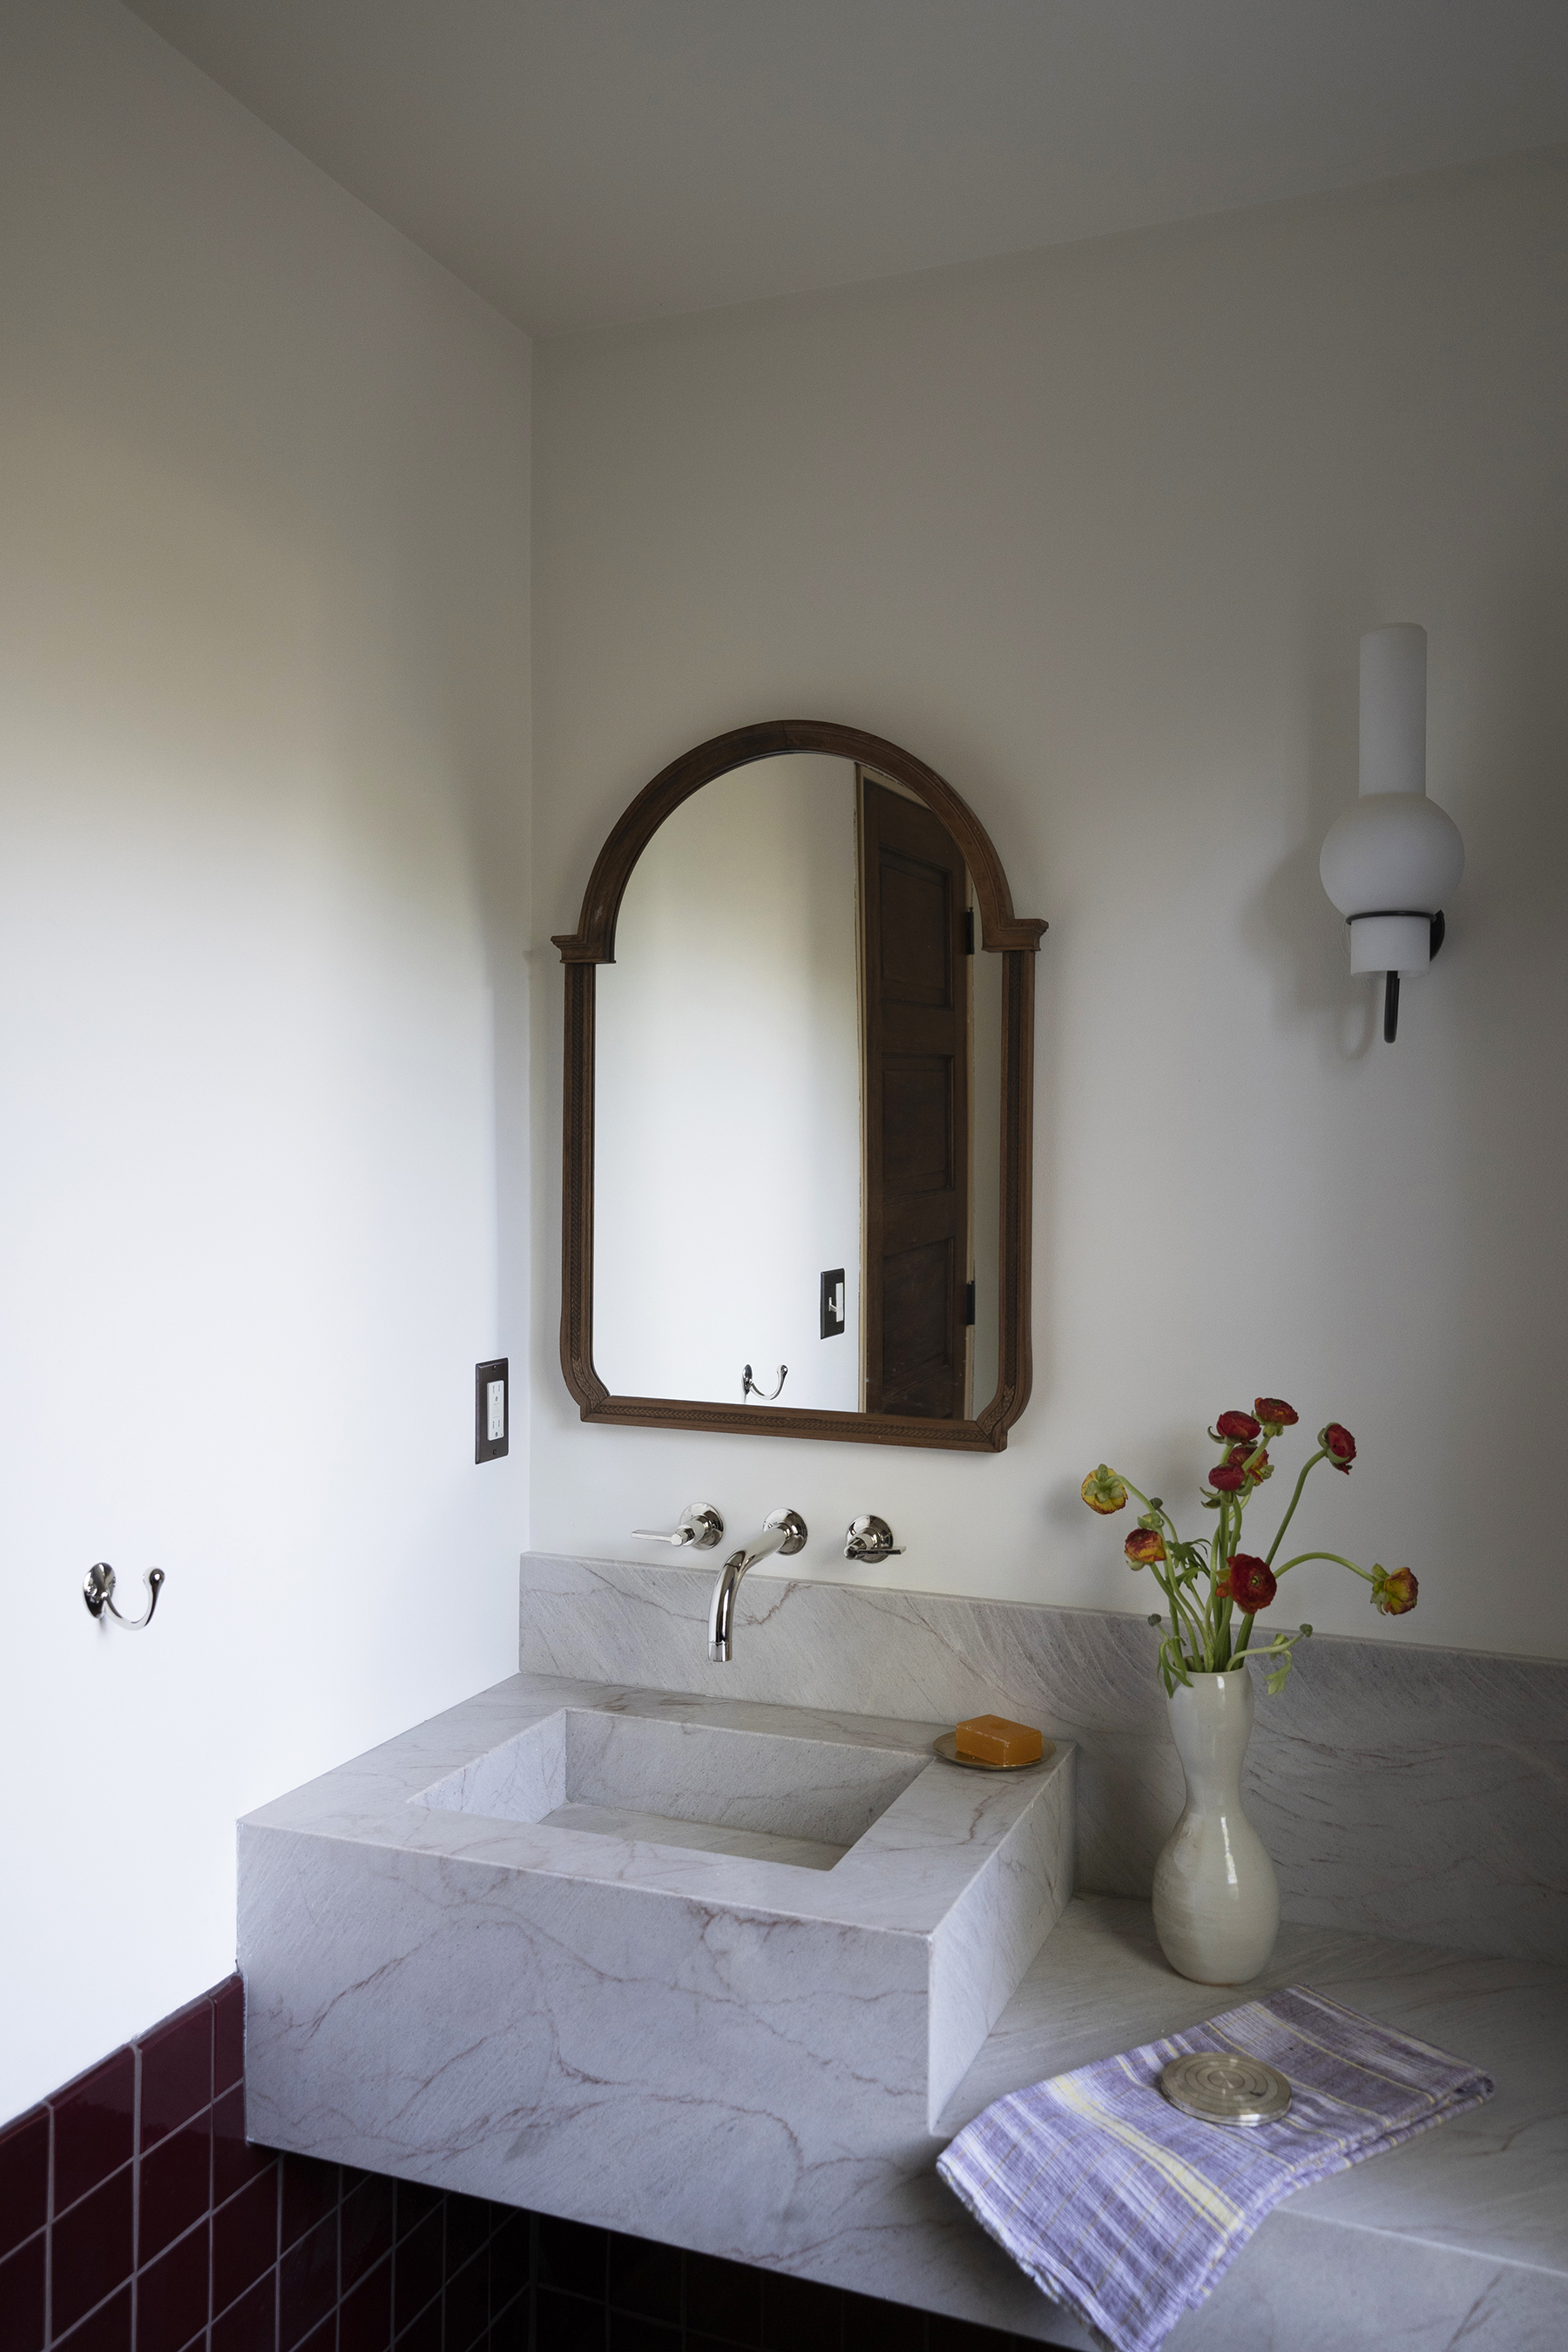 Powder bath for a residential renovation of a historic property in Los Angeles, CA, designed by Social Studies Projects.